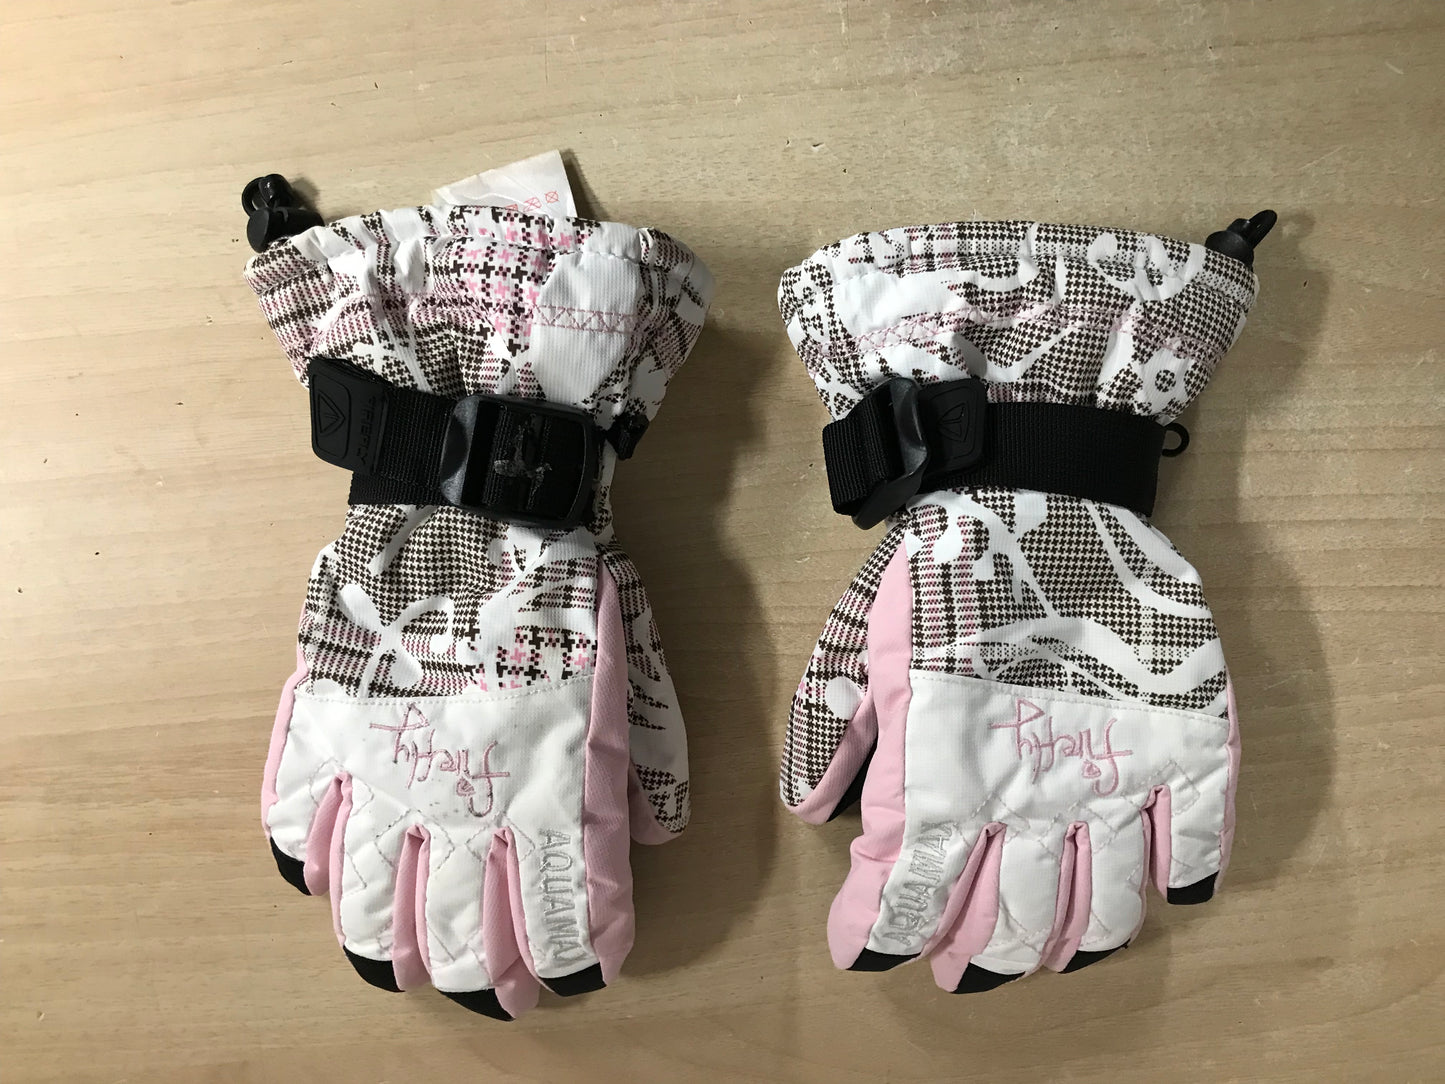 Winter Gloves and Mitts Child Size 8-10 Firefly Pink White Tan Waterproof Excellent Quality